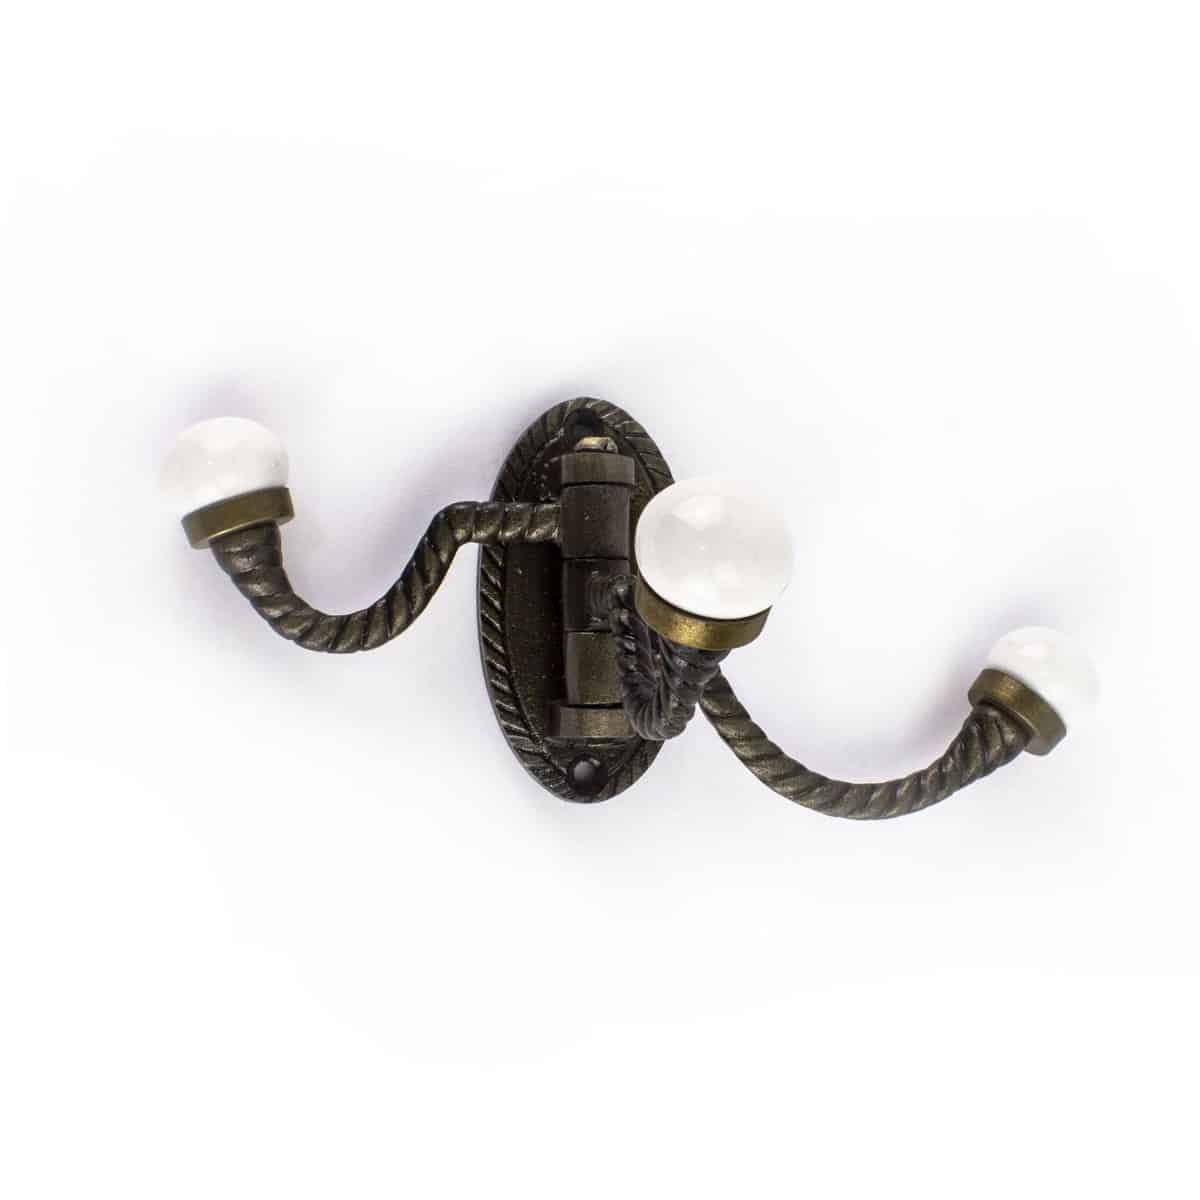 Antique Gold Trio Swivel Wall Hook - Shop for wall hooks online